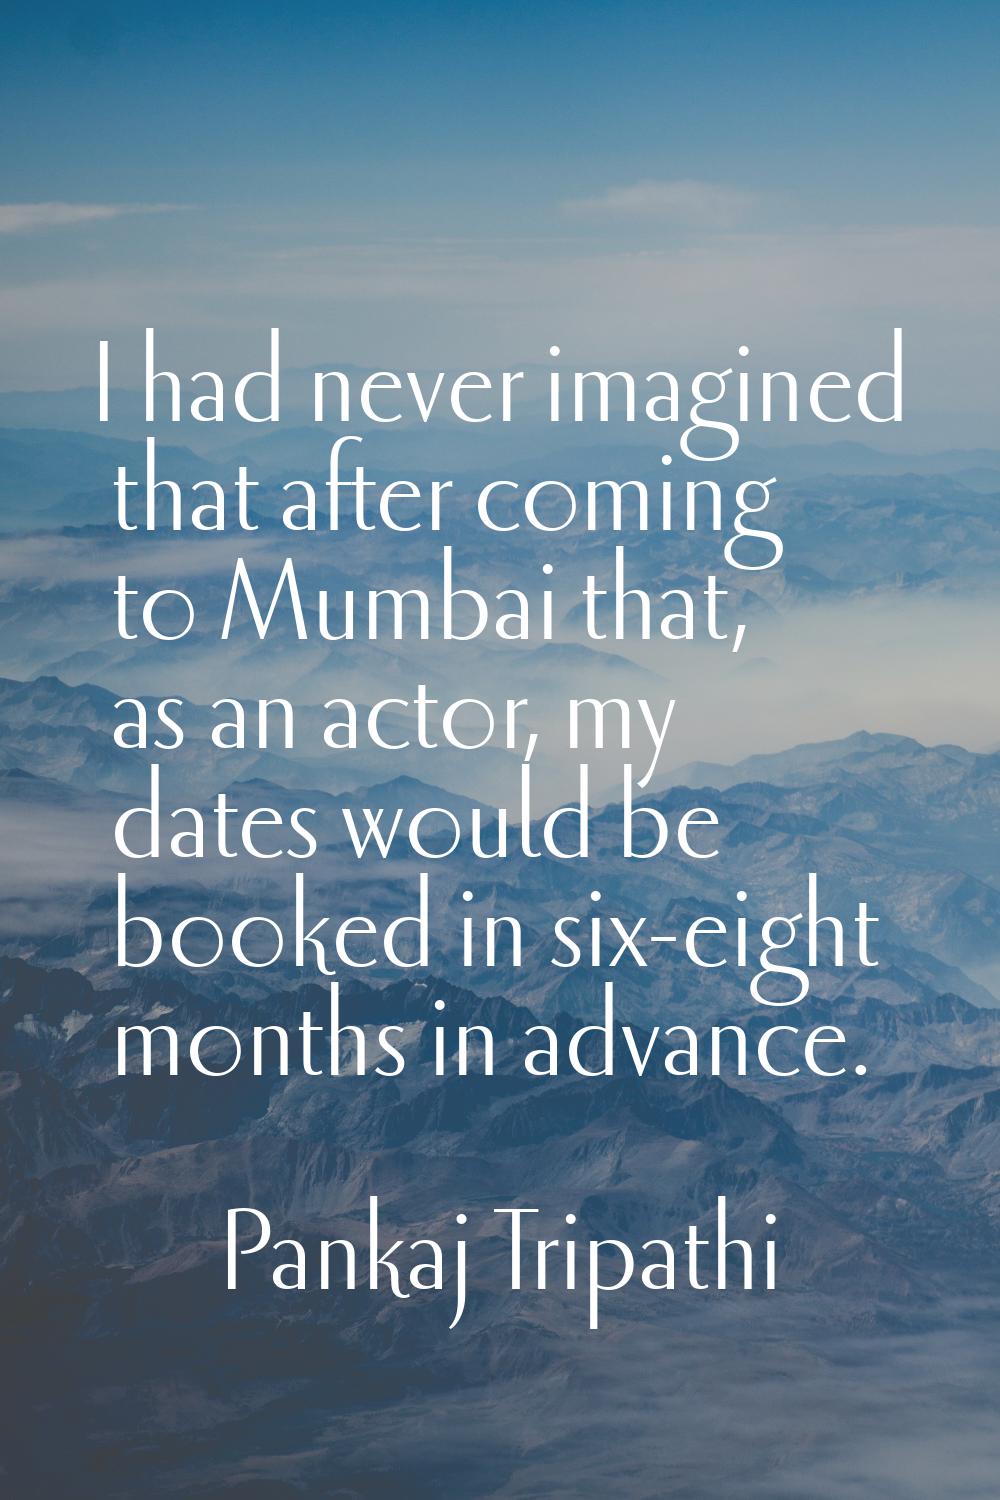 I had never imagined that after coming to Mumbai that, as an actor, my dates would be booked in six